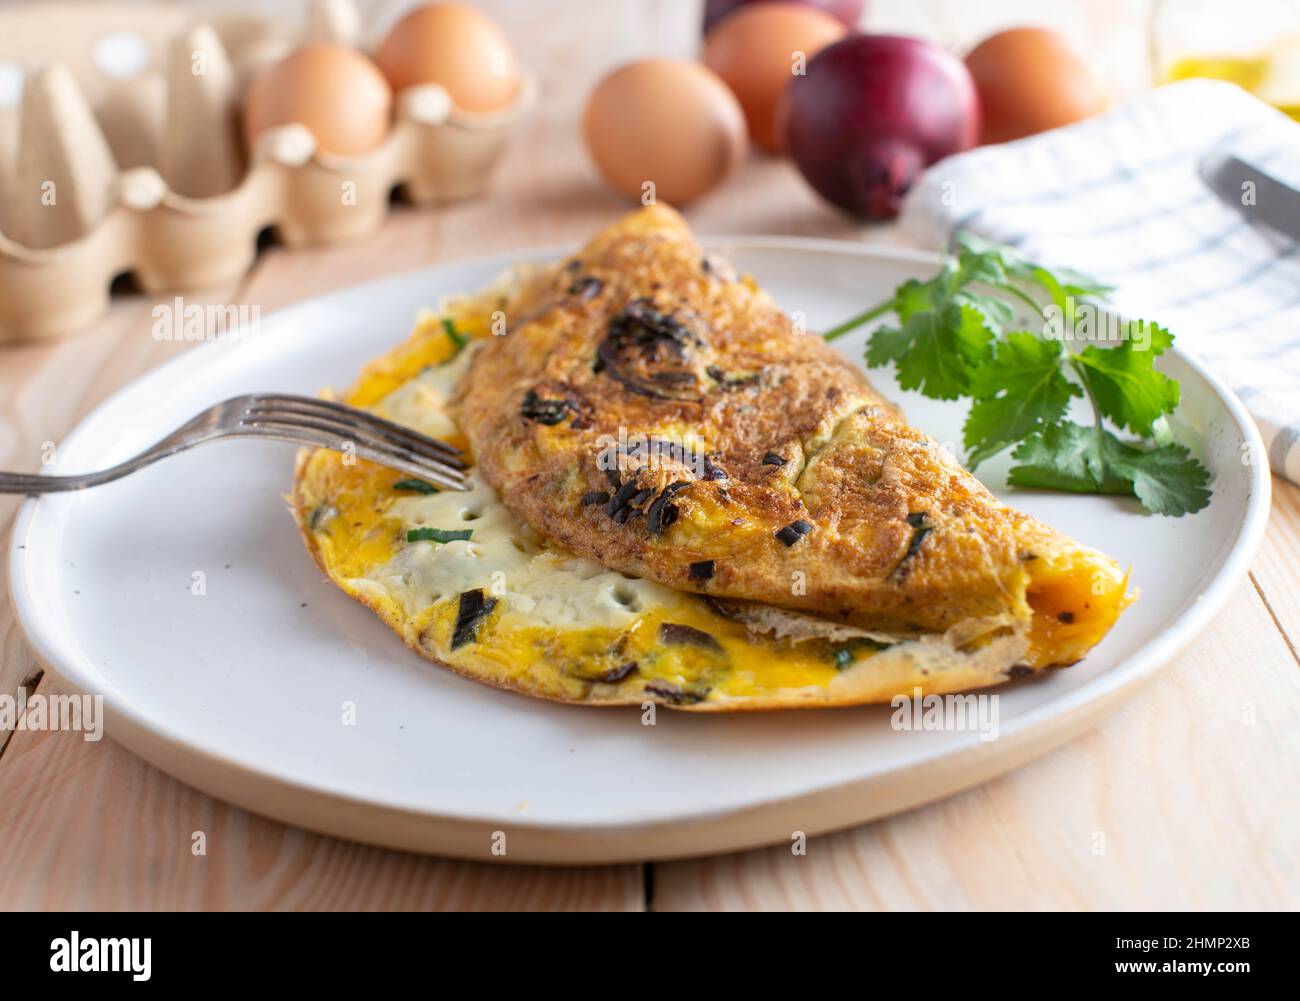 Omelette or omelet with roasted red onions, chives and cheese, Low carb or ketogenic meal Stock Photo